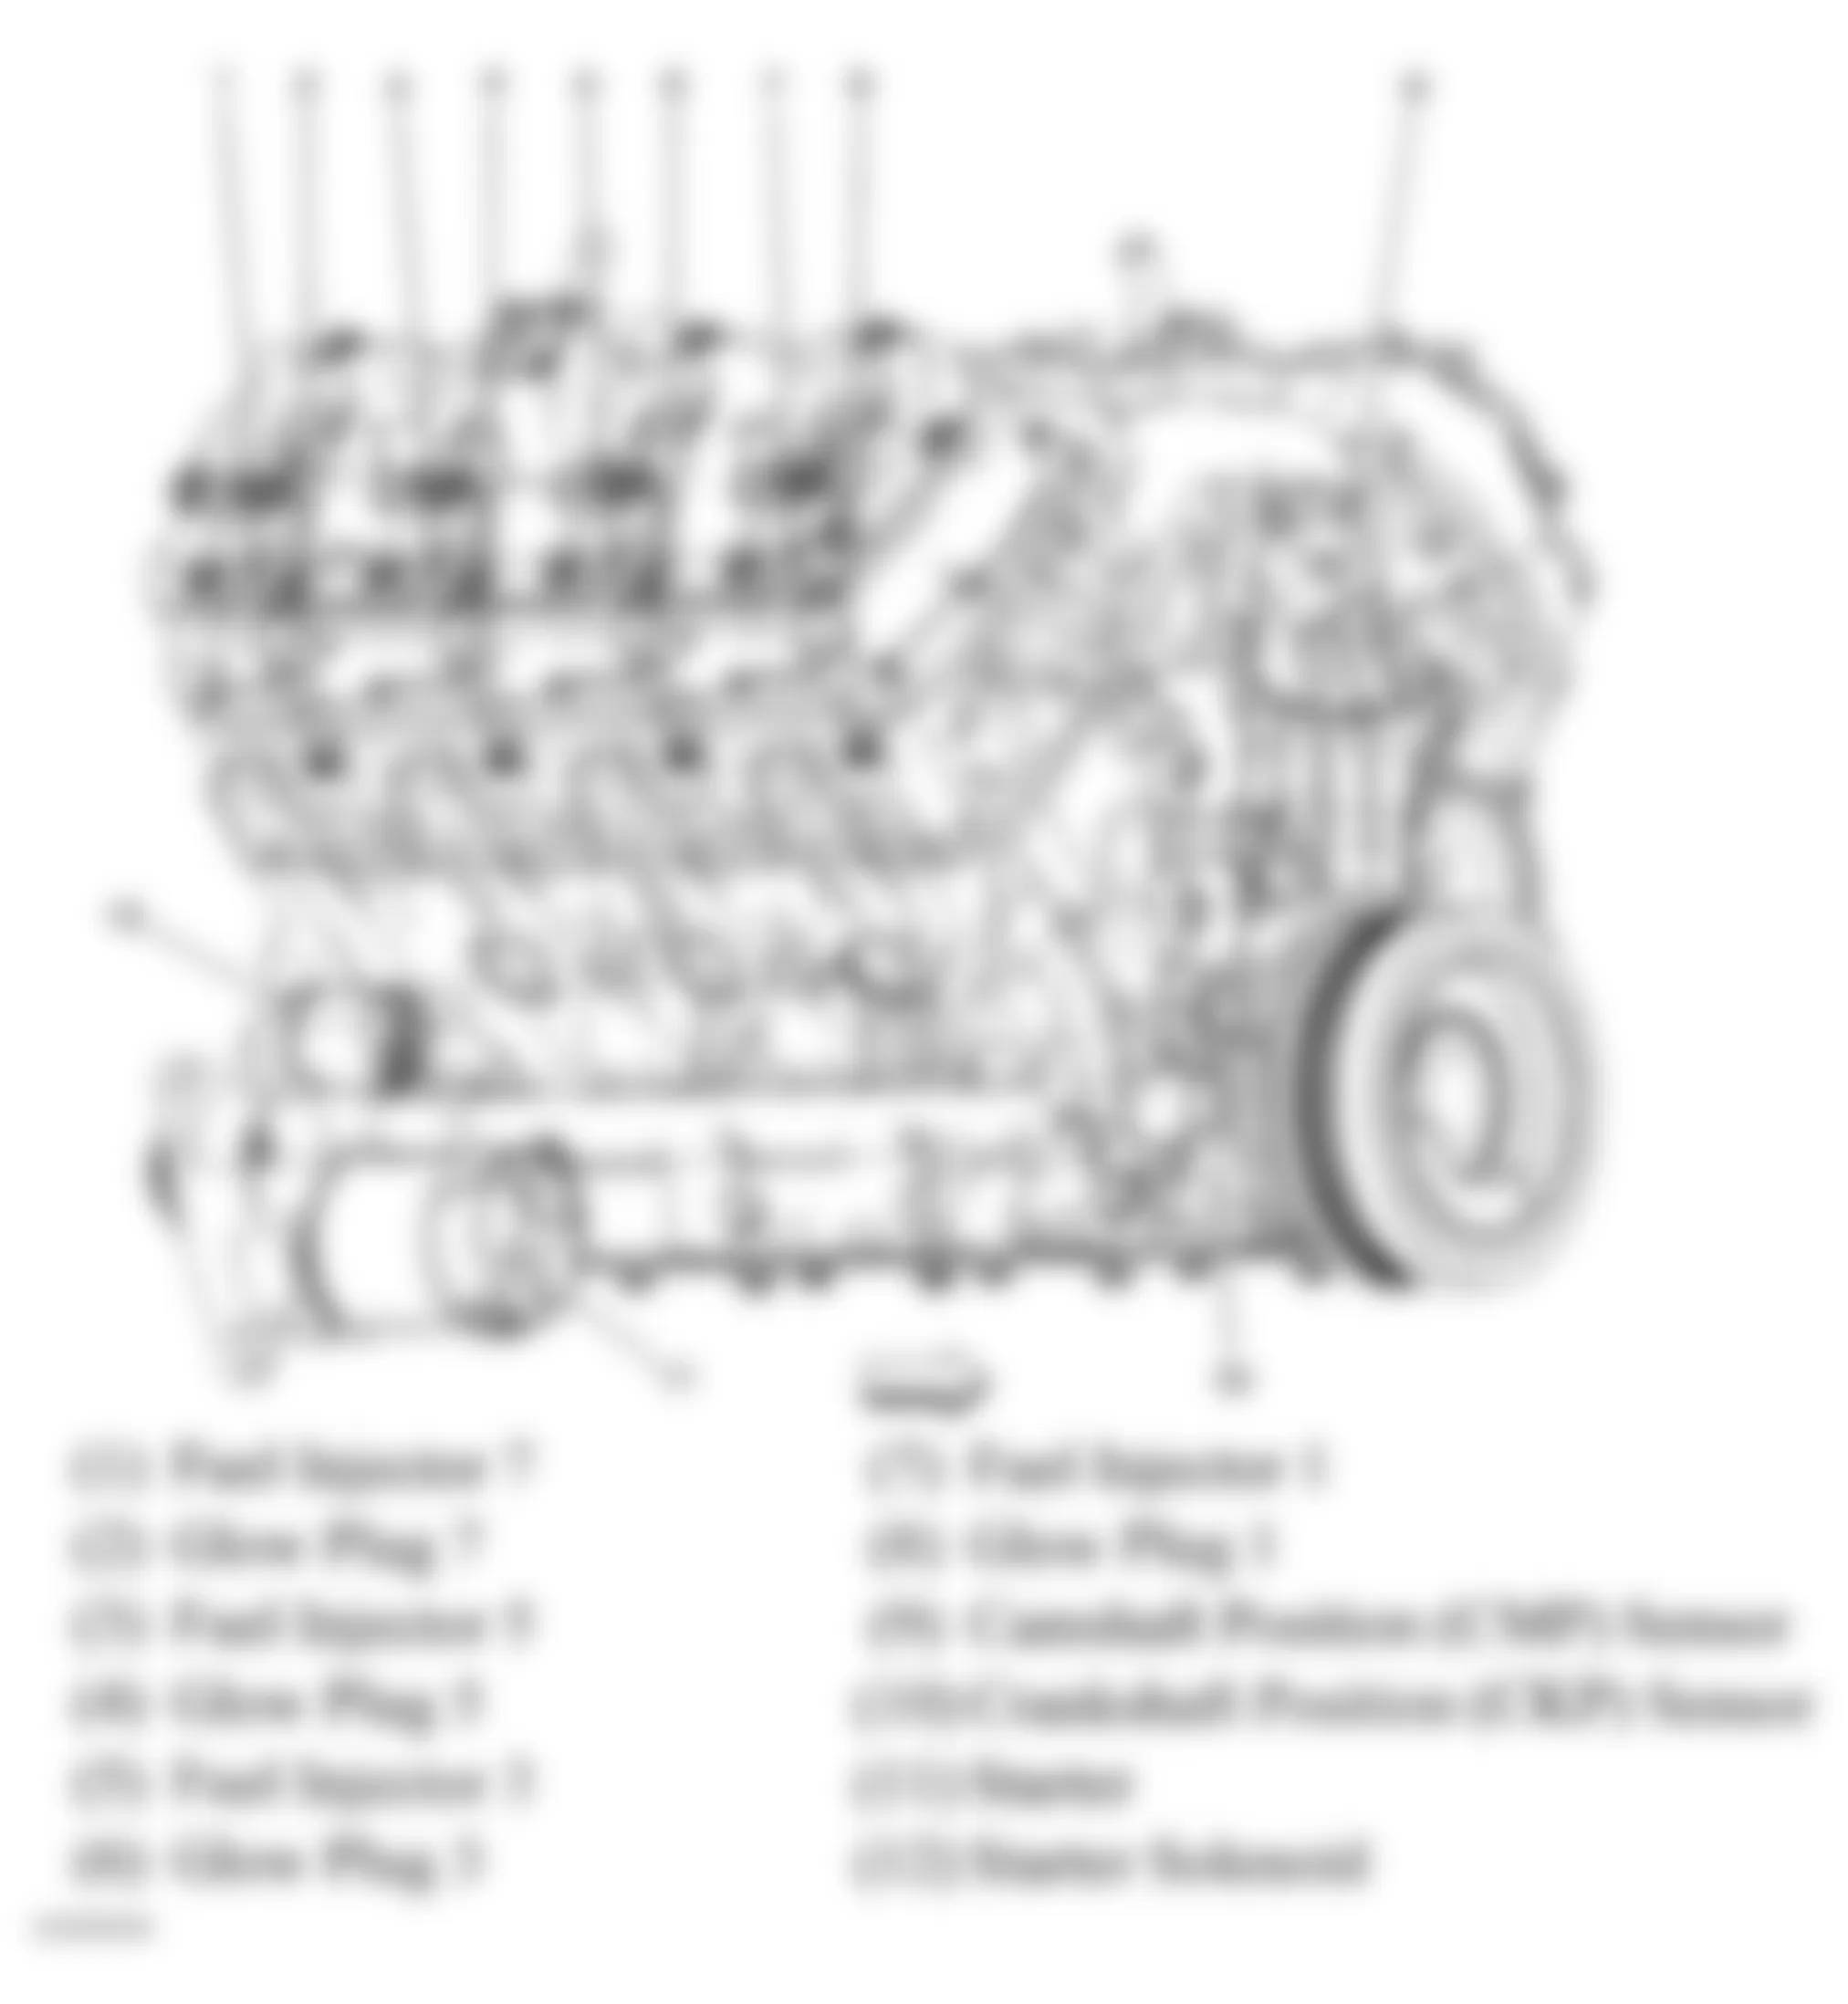 GMC Savana G1500 2008 - Component Locations -  Right Side Of Engine (6.6L)